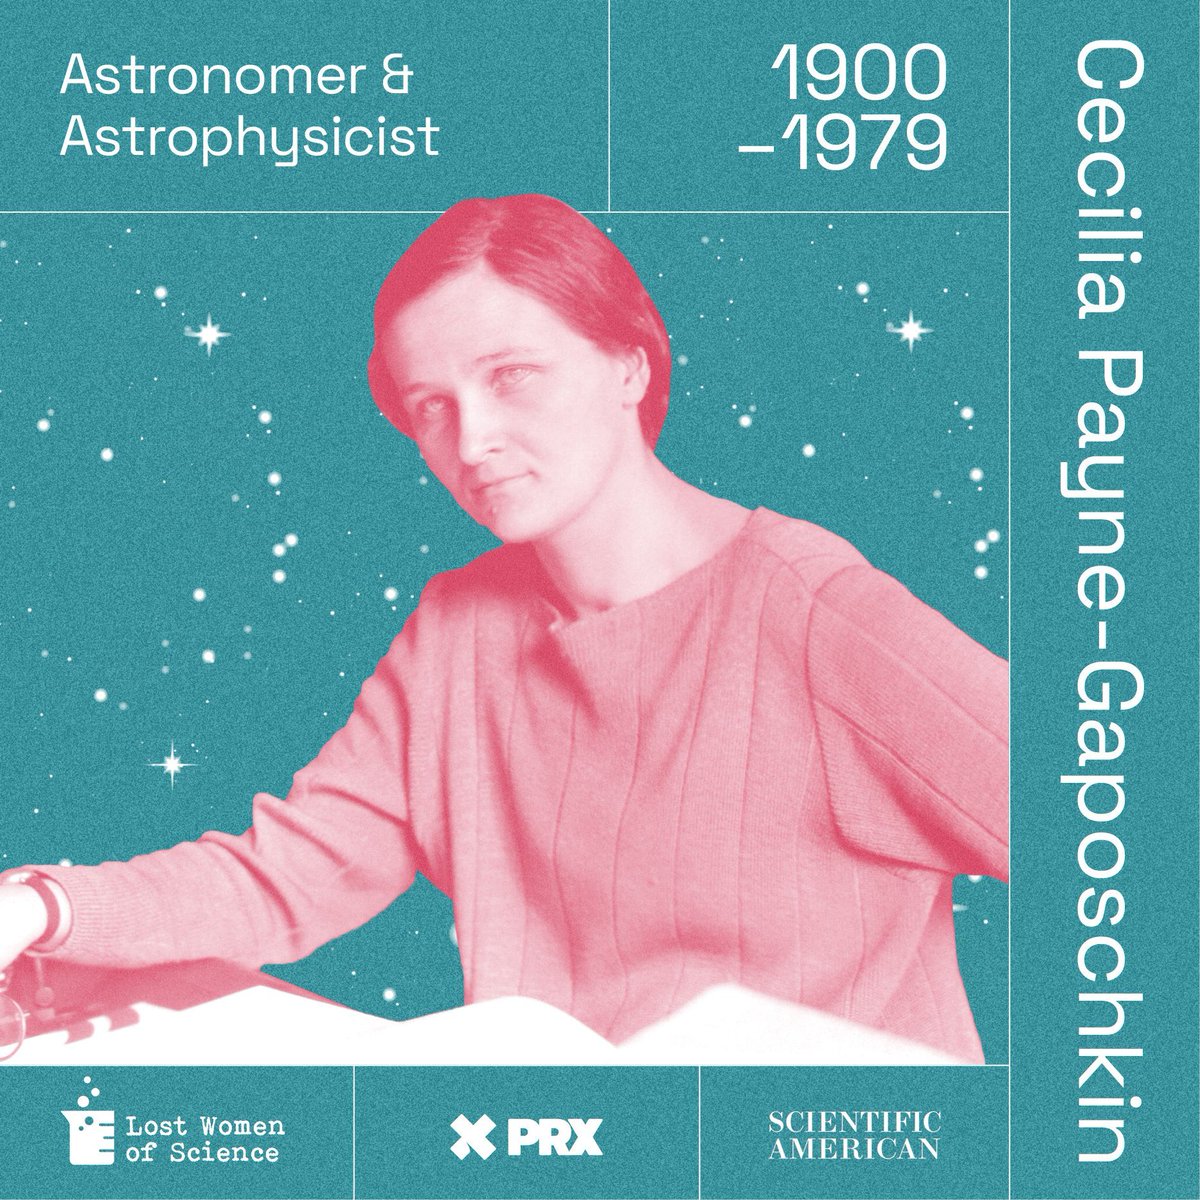 Did you catch the solar eclipse yesterday and it left you wanting more? This week on LWoS we are continuing the astronomy theme with one of our favorite episodes on astronomer Cecilia Payne-Gaposchkin, who figured out what the stars are made of. Listen to the full episode in bio!